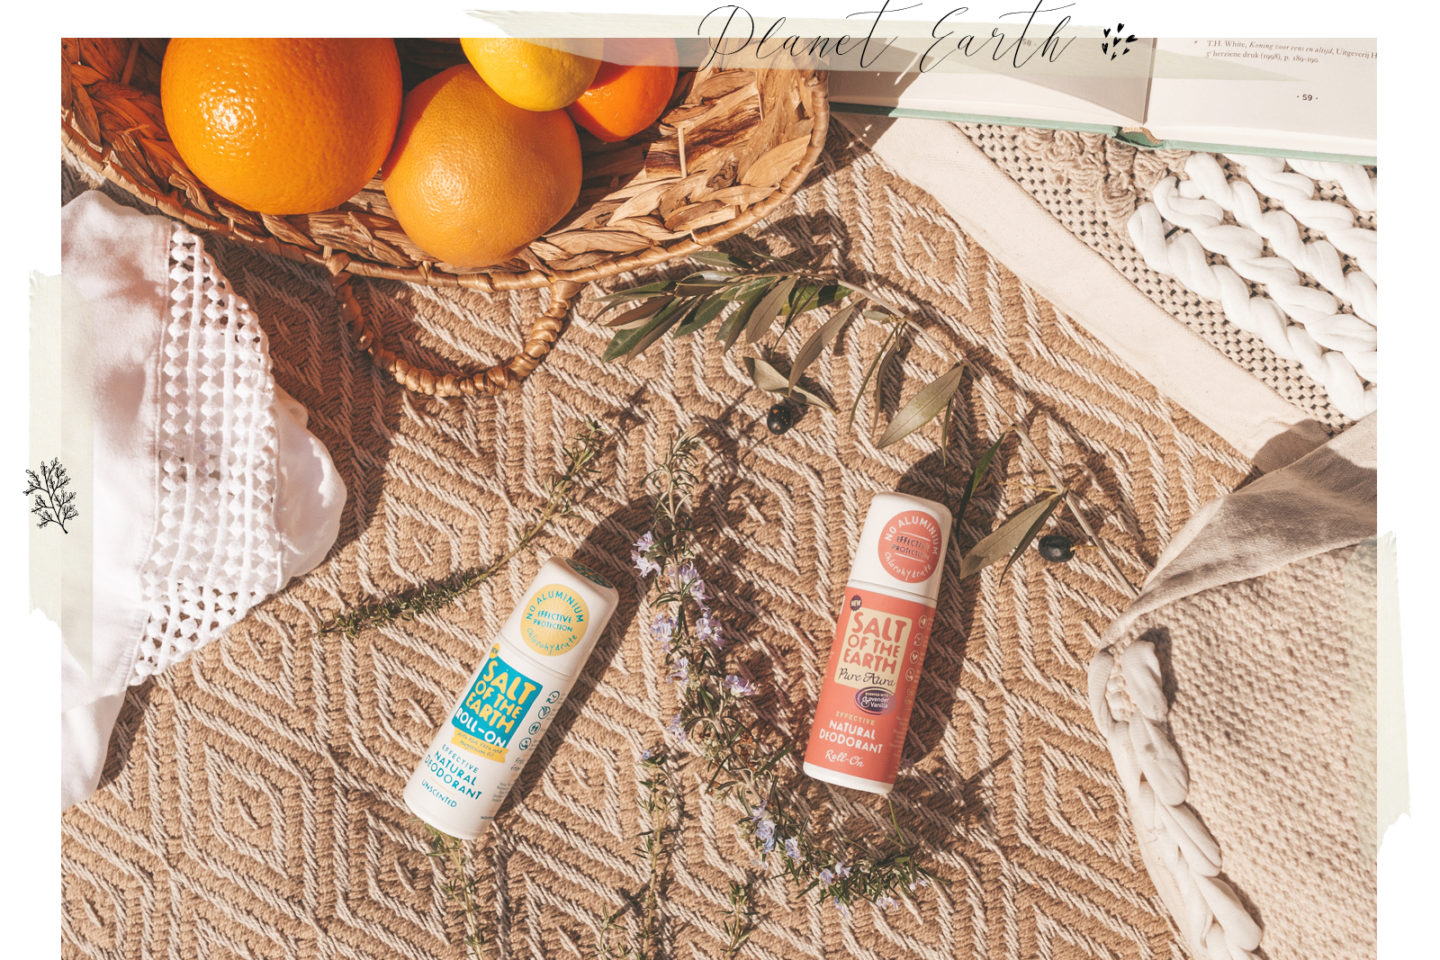 Salt of the Earth Roll-on deodorant Linda's wholesome life